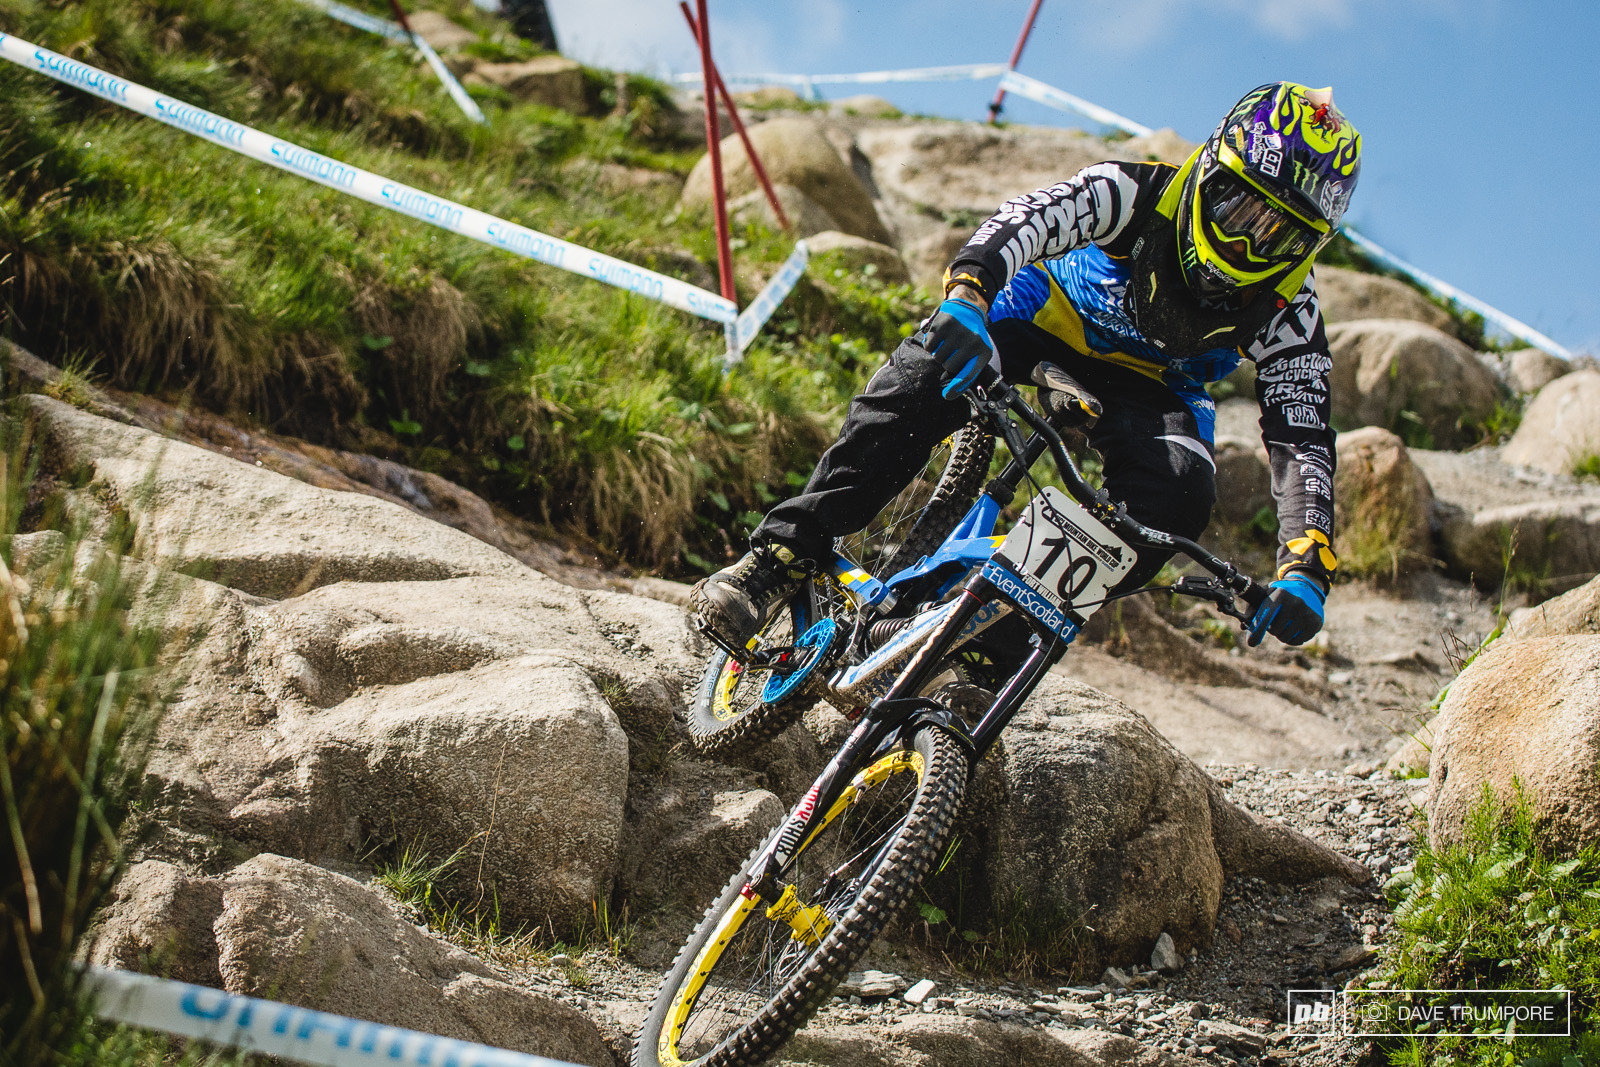 Sam Hill was absolutely pinned through the rocks up top.  It's been a while since he has so confidently attacked such gnarly tracks and it's good to see him so close to that top step of the podium.